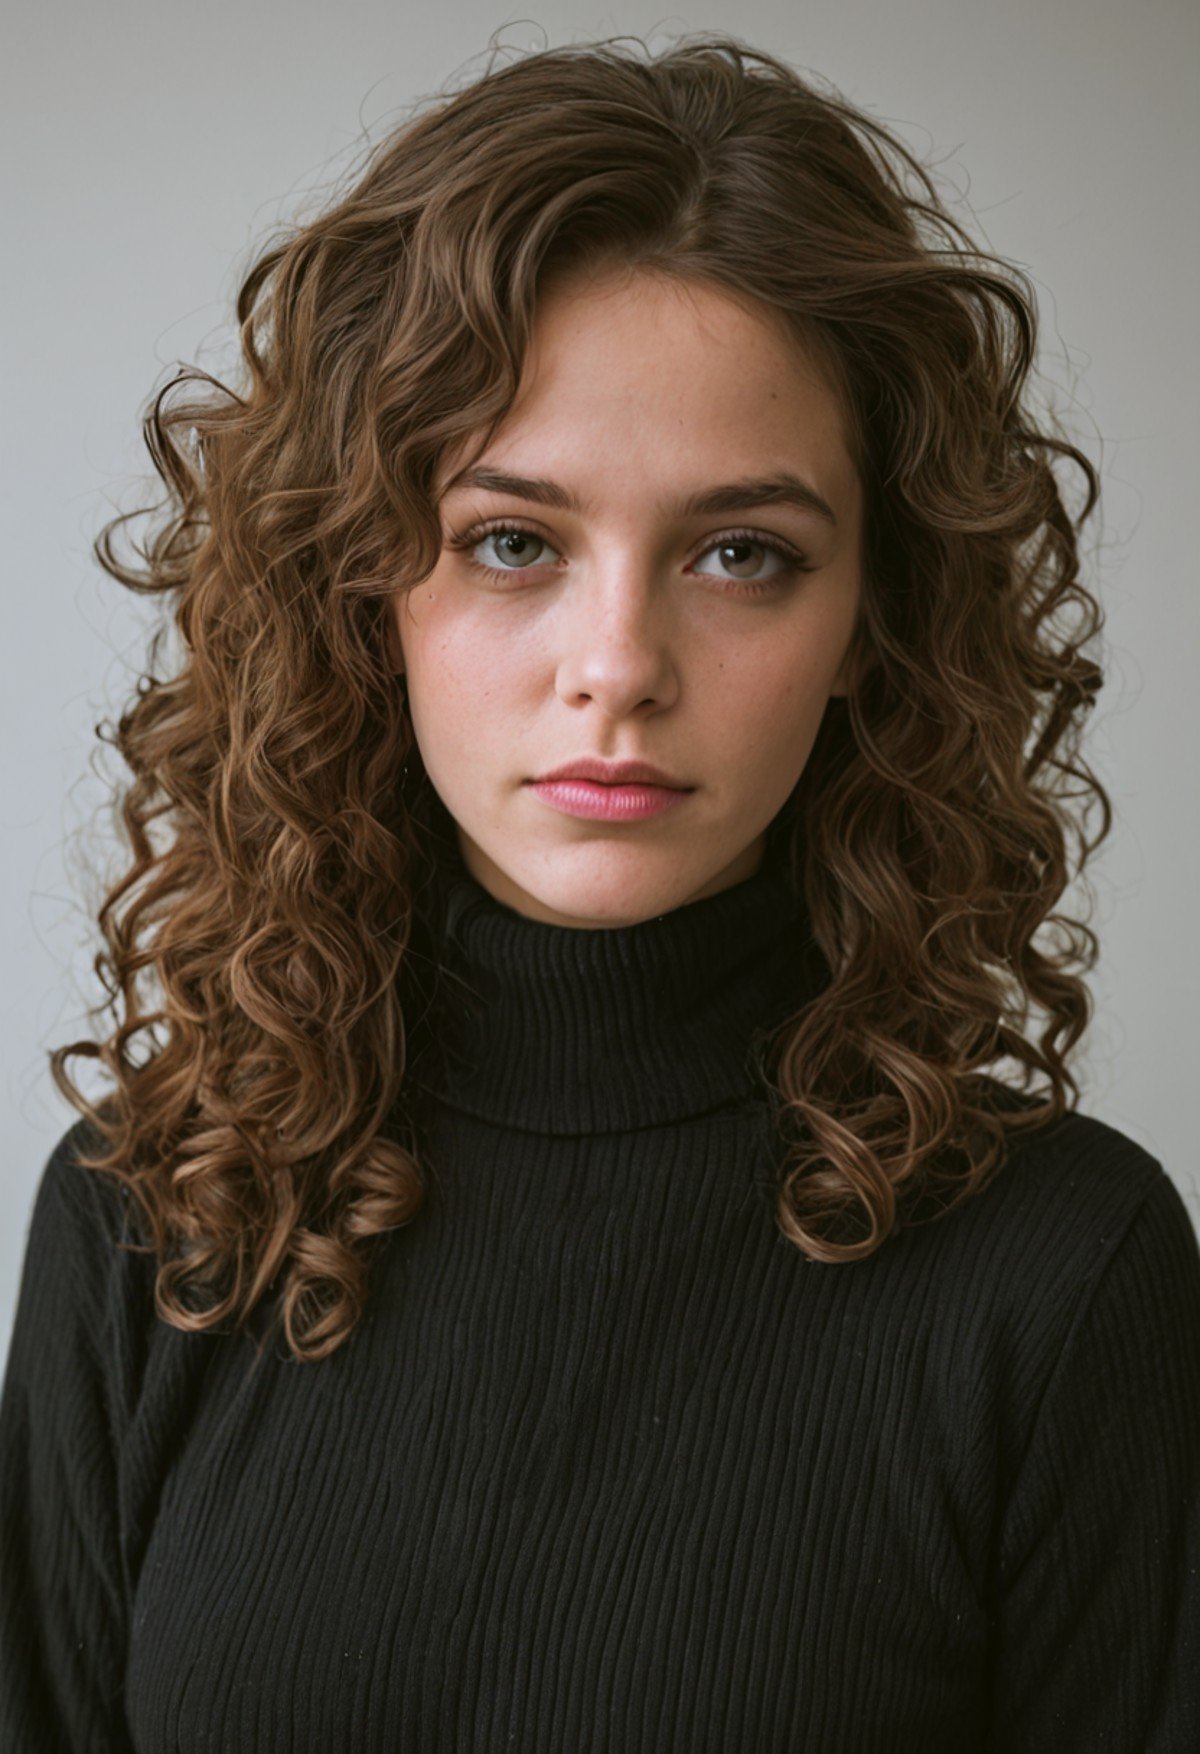 score_9, score_8_up, score_7_up, score_6_up, BREAK , source_real, raw, photo, realistic BREAK an woman,clean skin,wearing a black turtleneck sweater,soft hair,black long curly hair,looking at the camera,